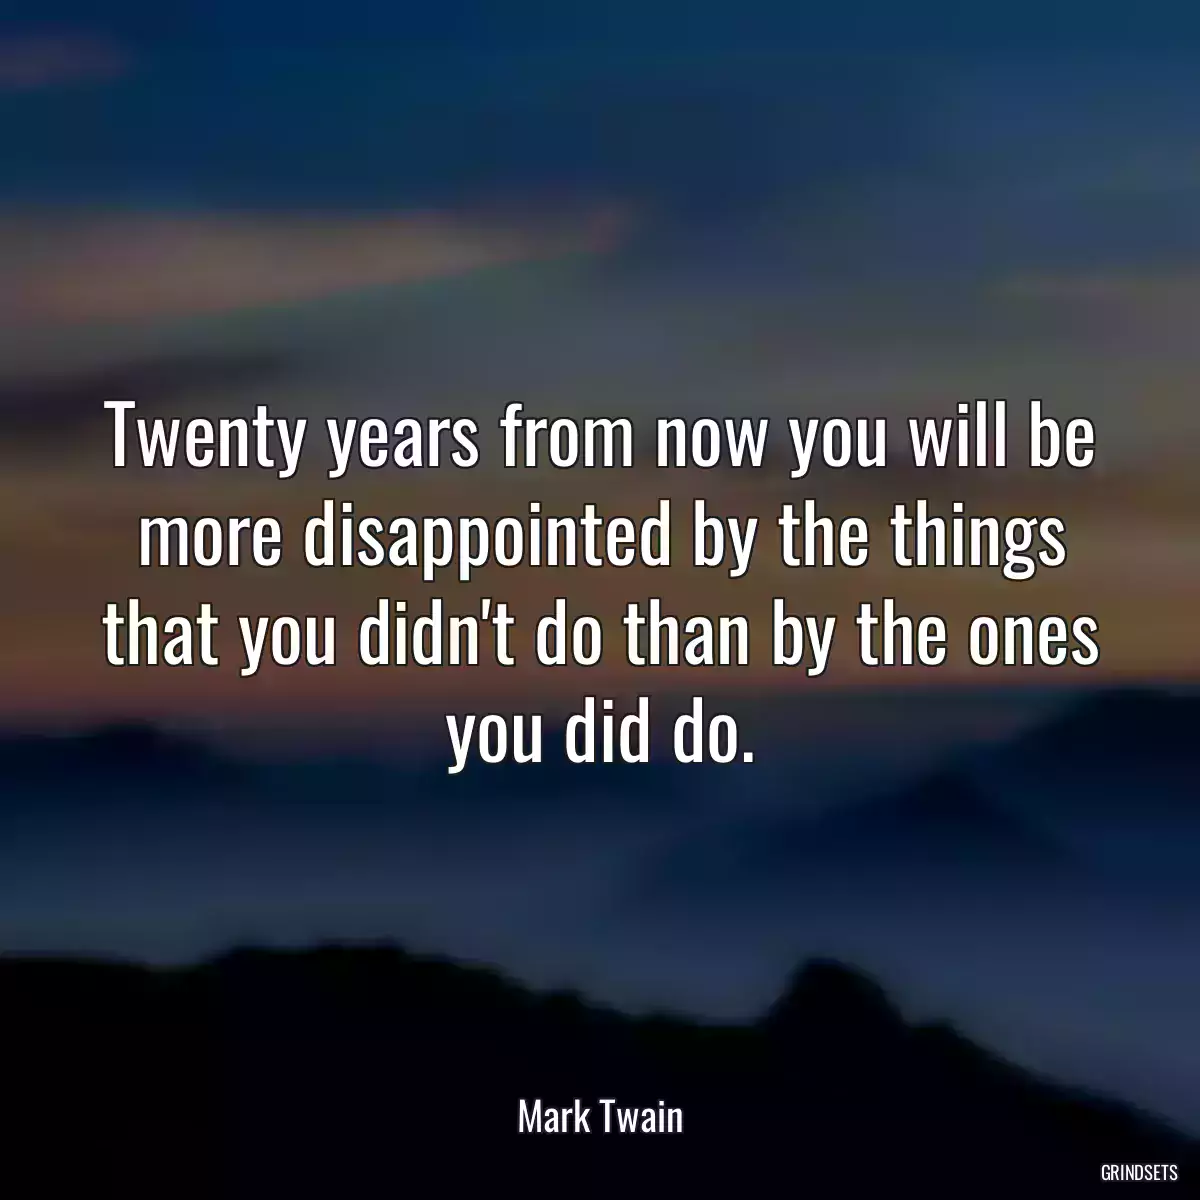 Twenty years from now you will be more disappointed by the things that you didn\'t do than by the ones you did do.